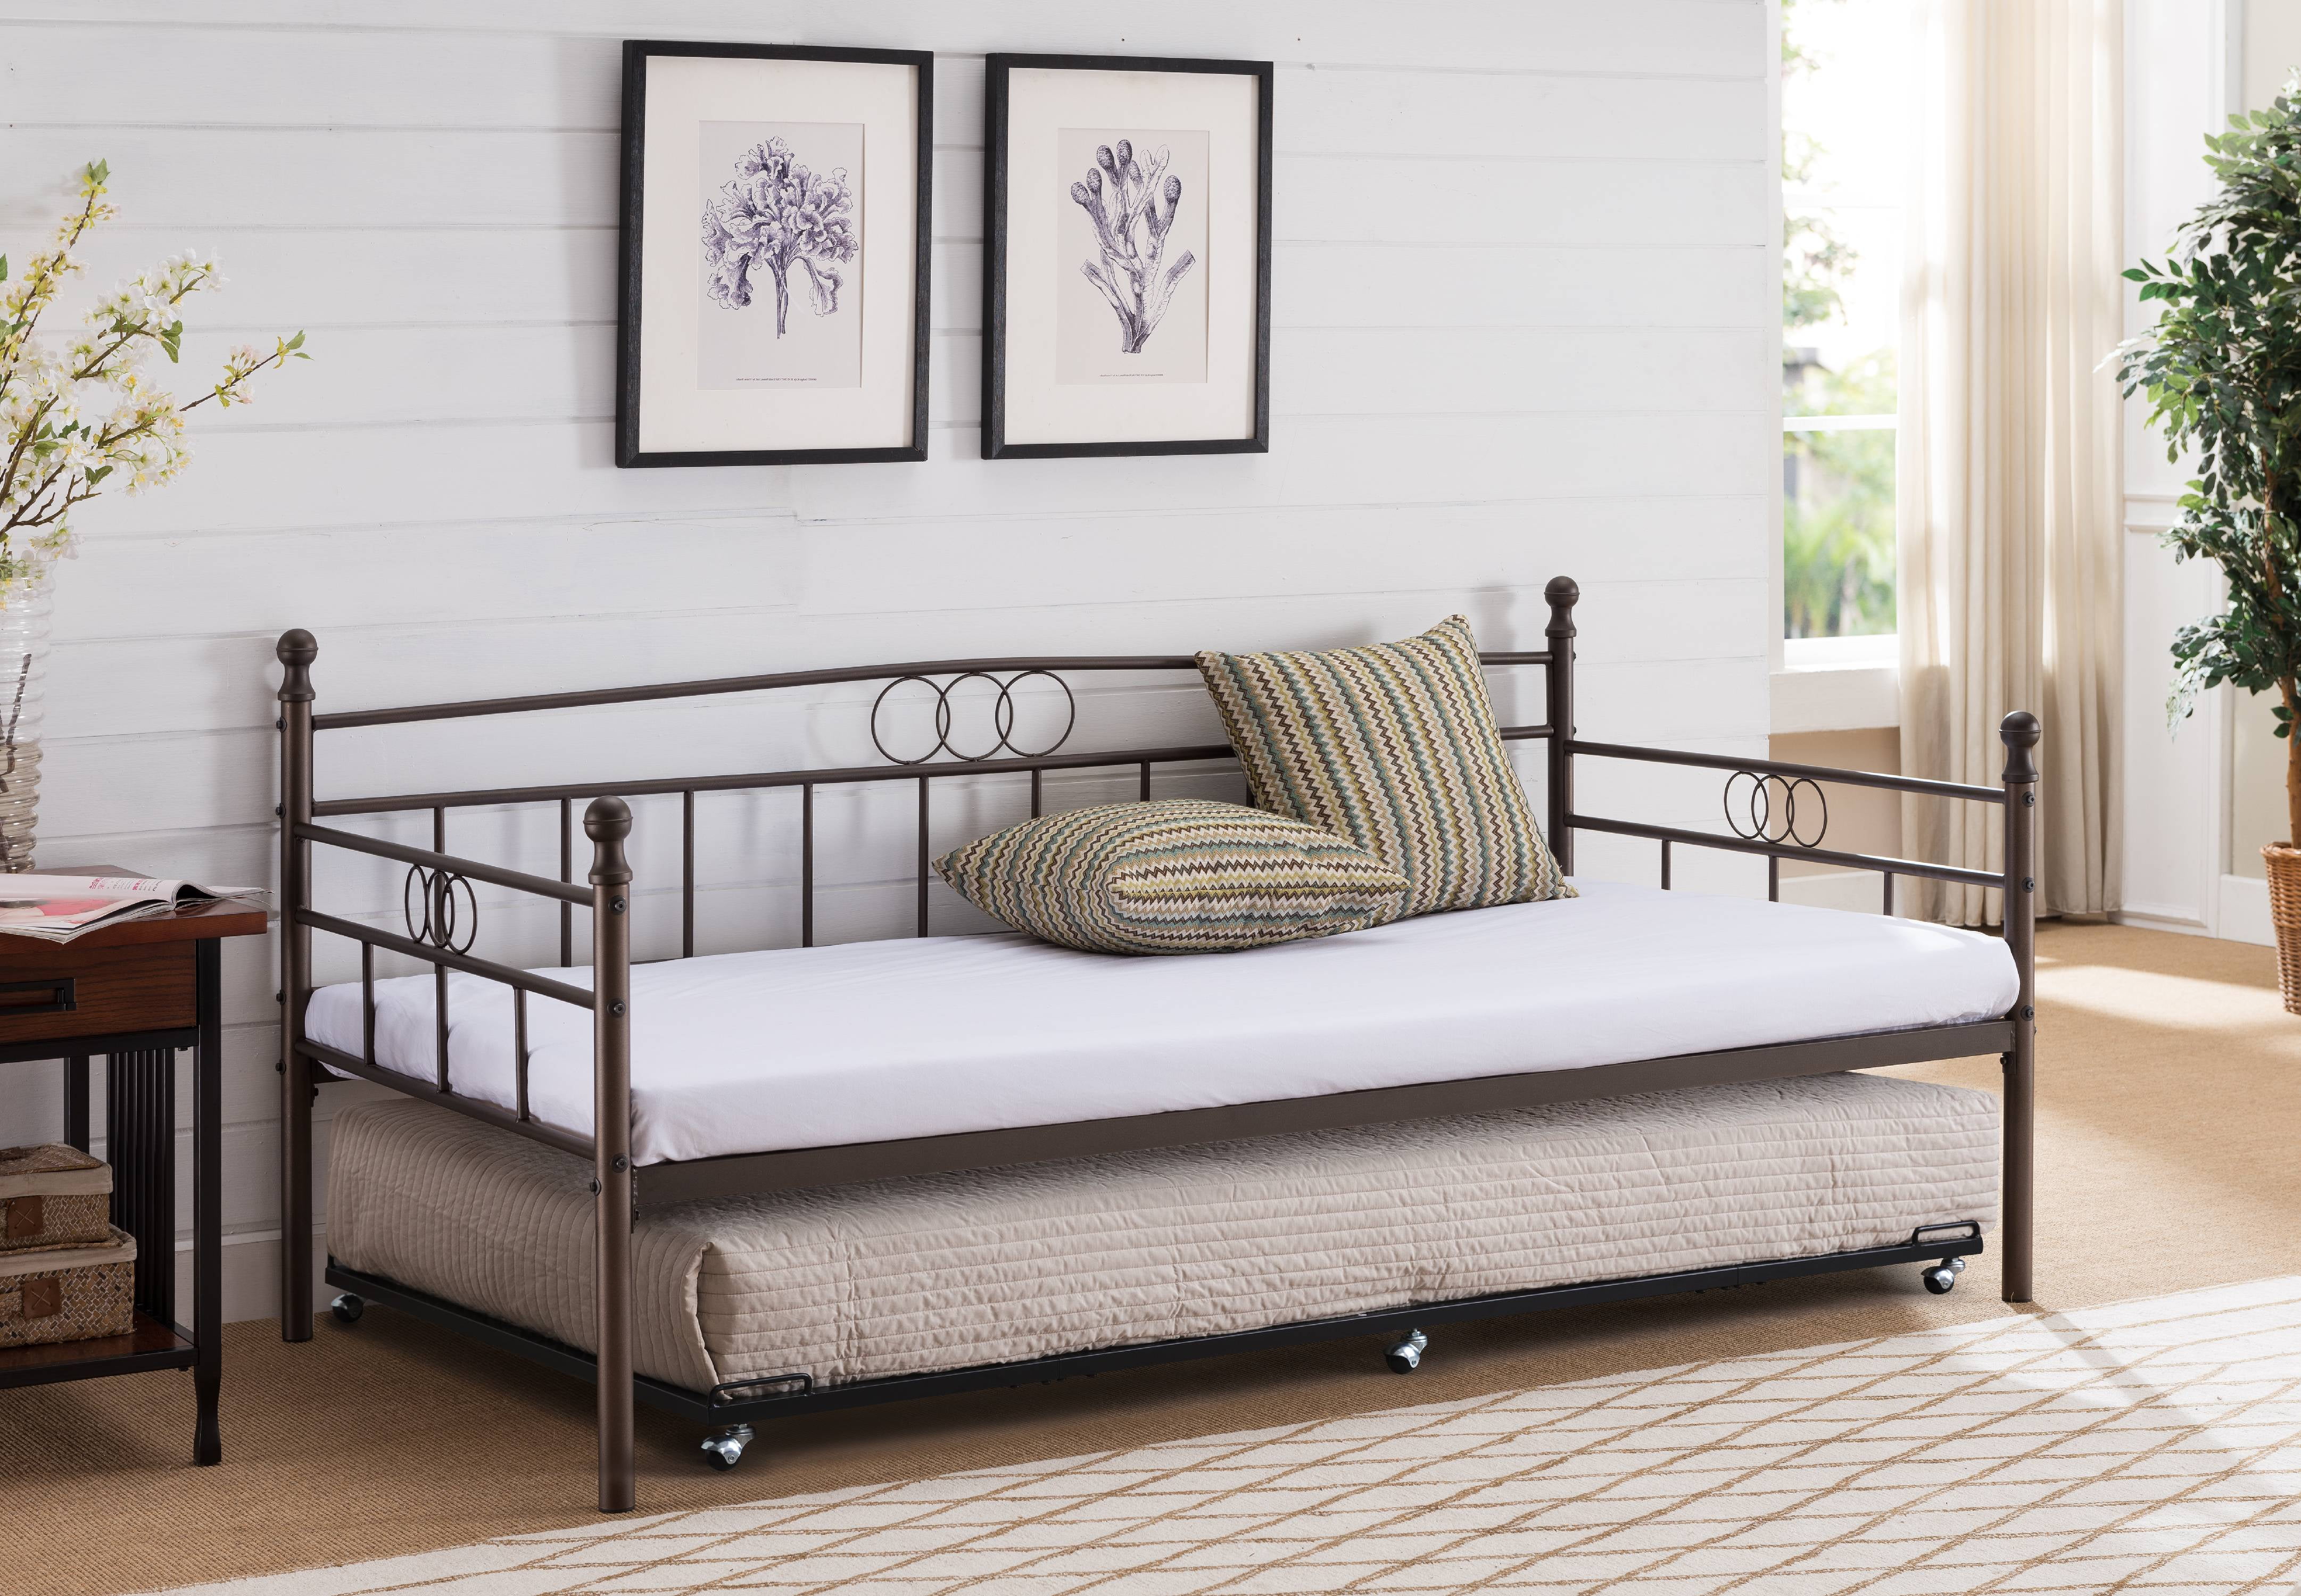 twin mattresses for trundle